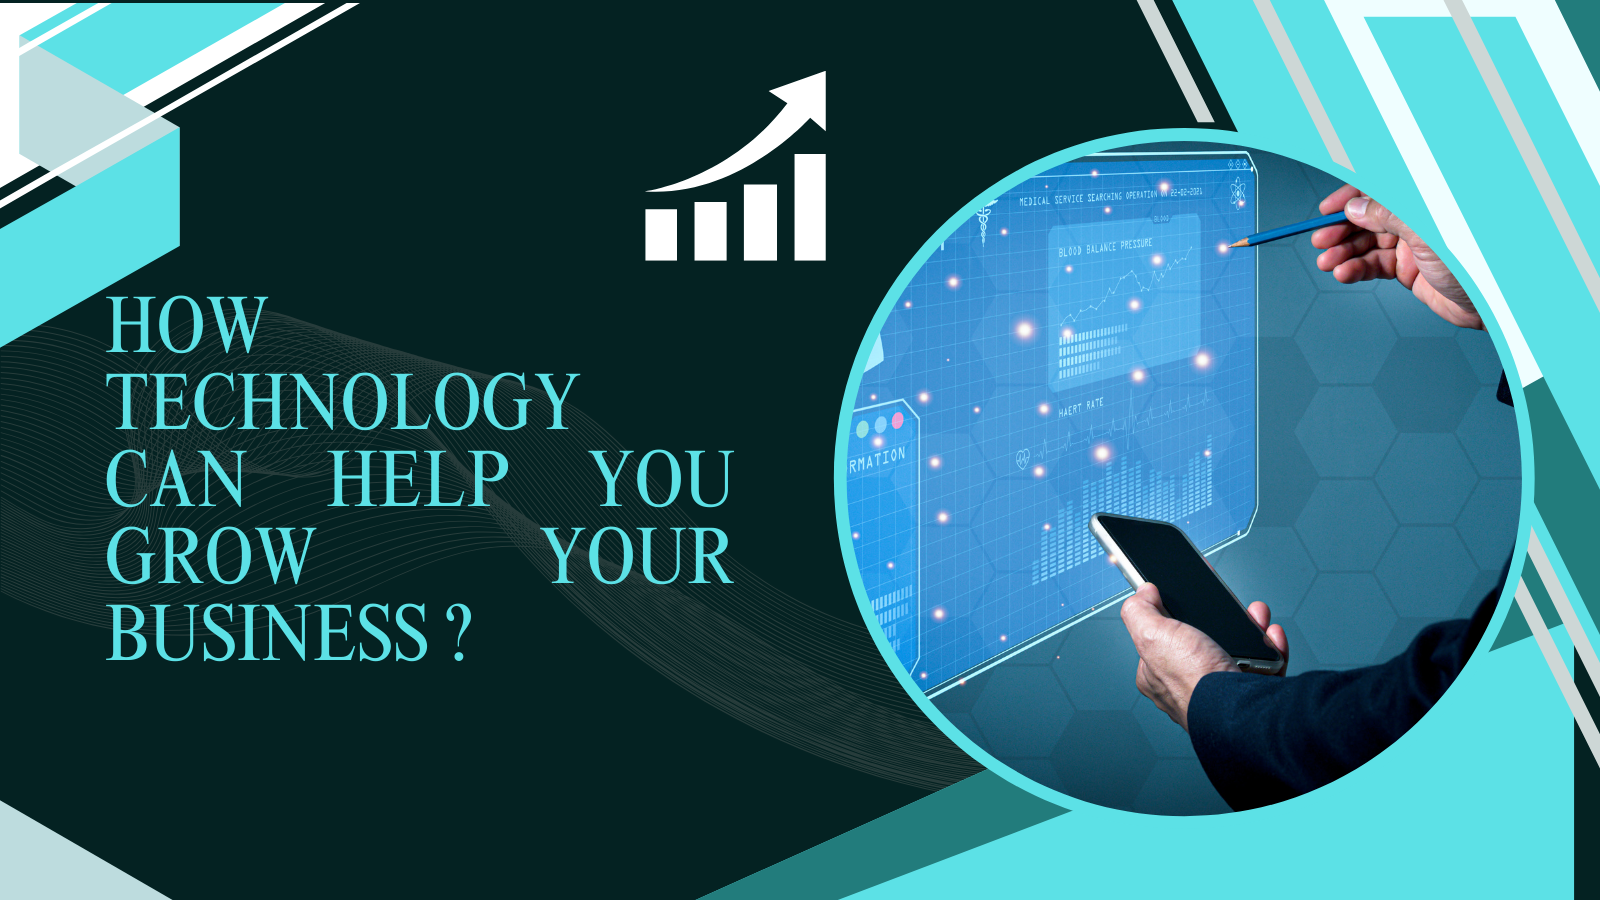 HOW TECHNOLOGY CAN HELP YOU GROW YOUR BUSINESS ?